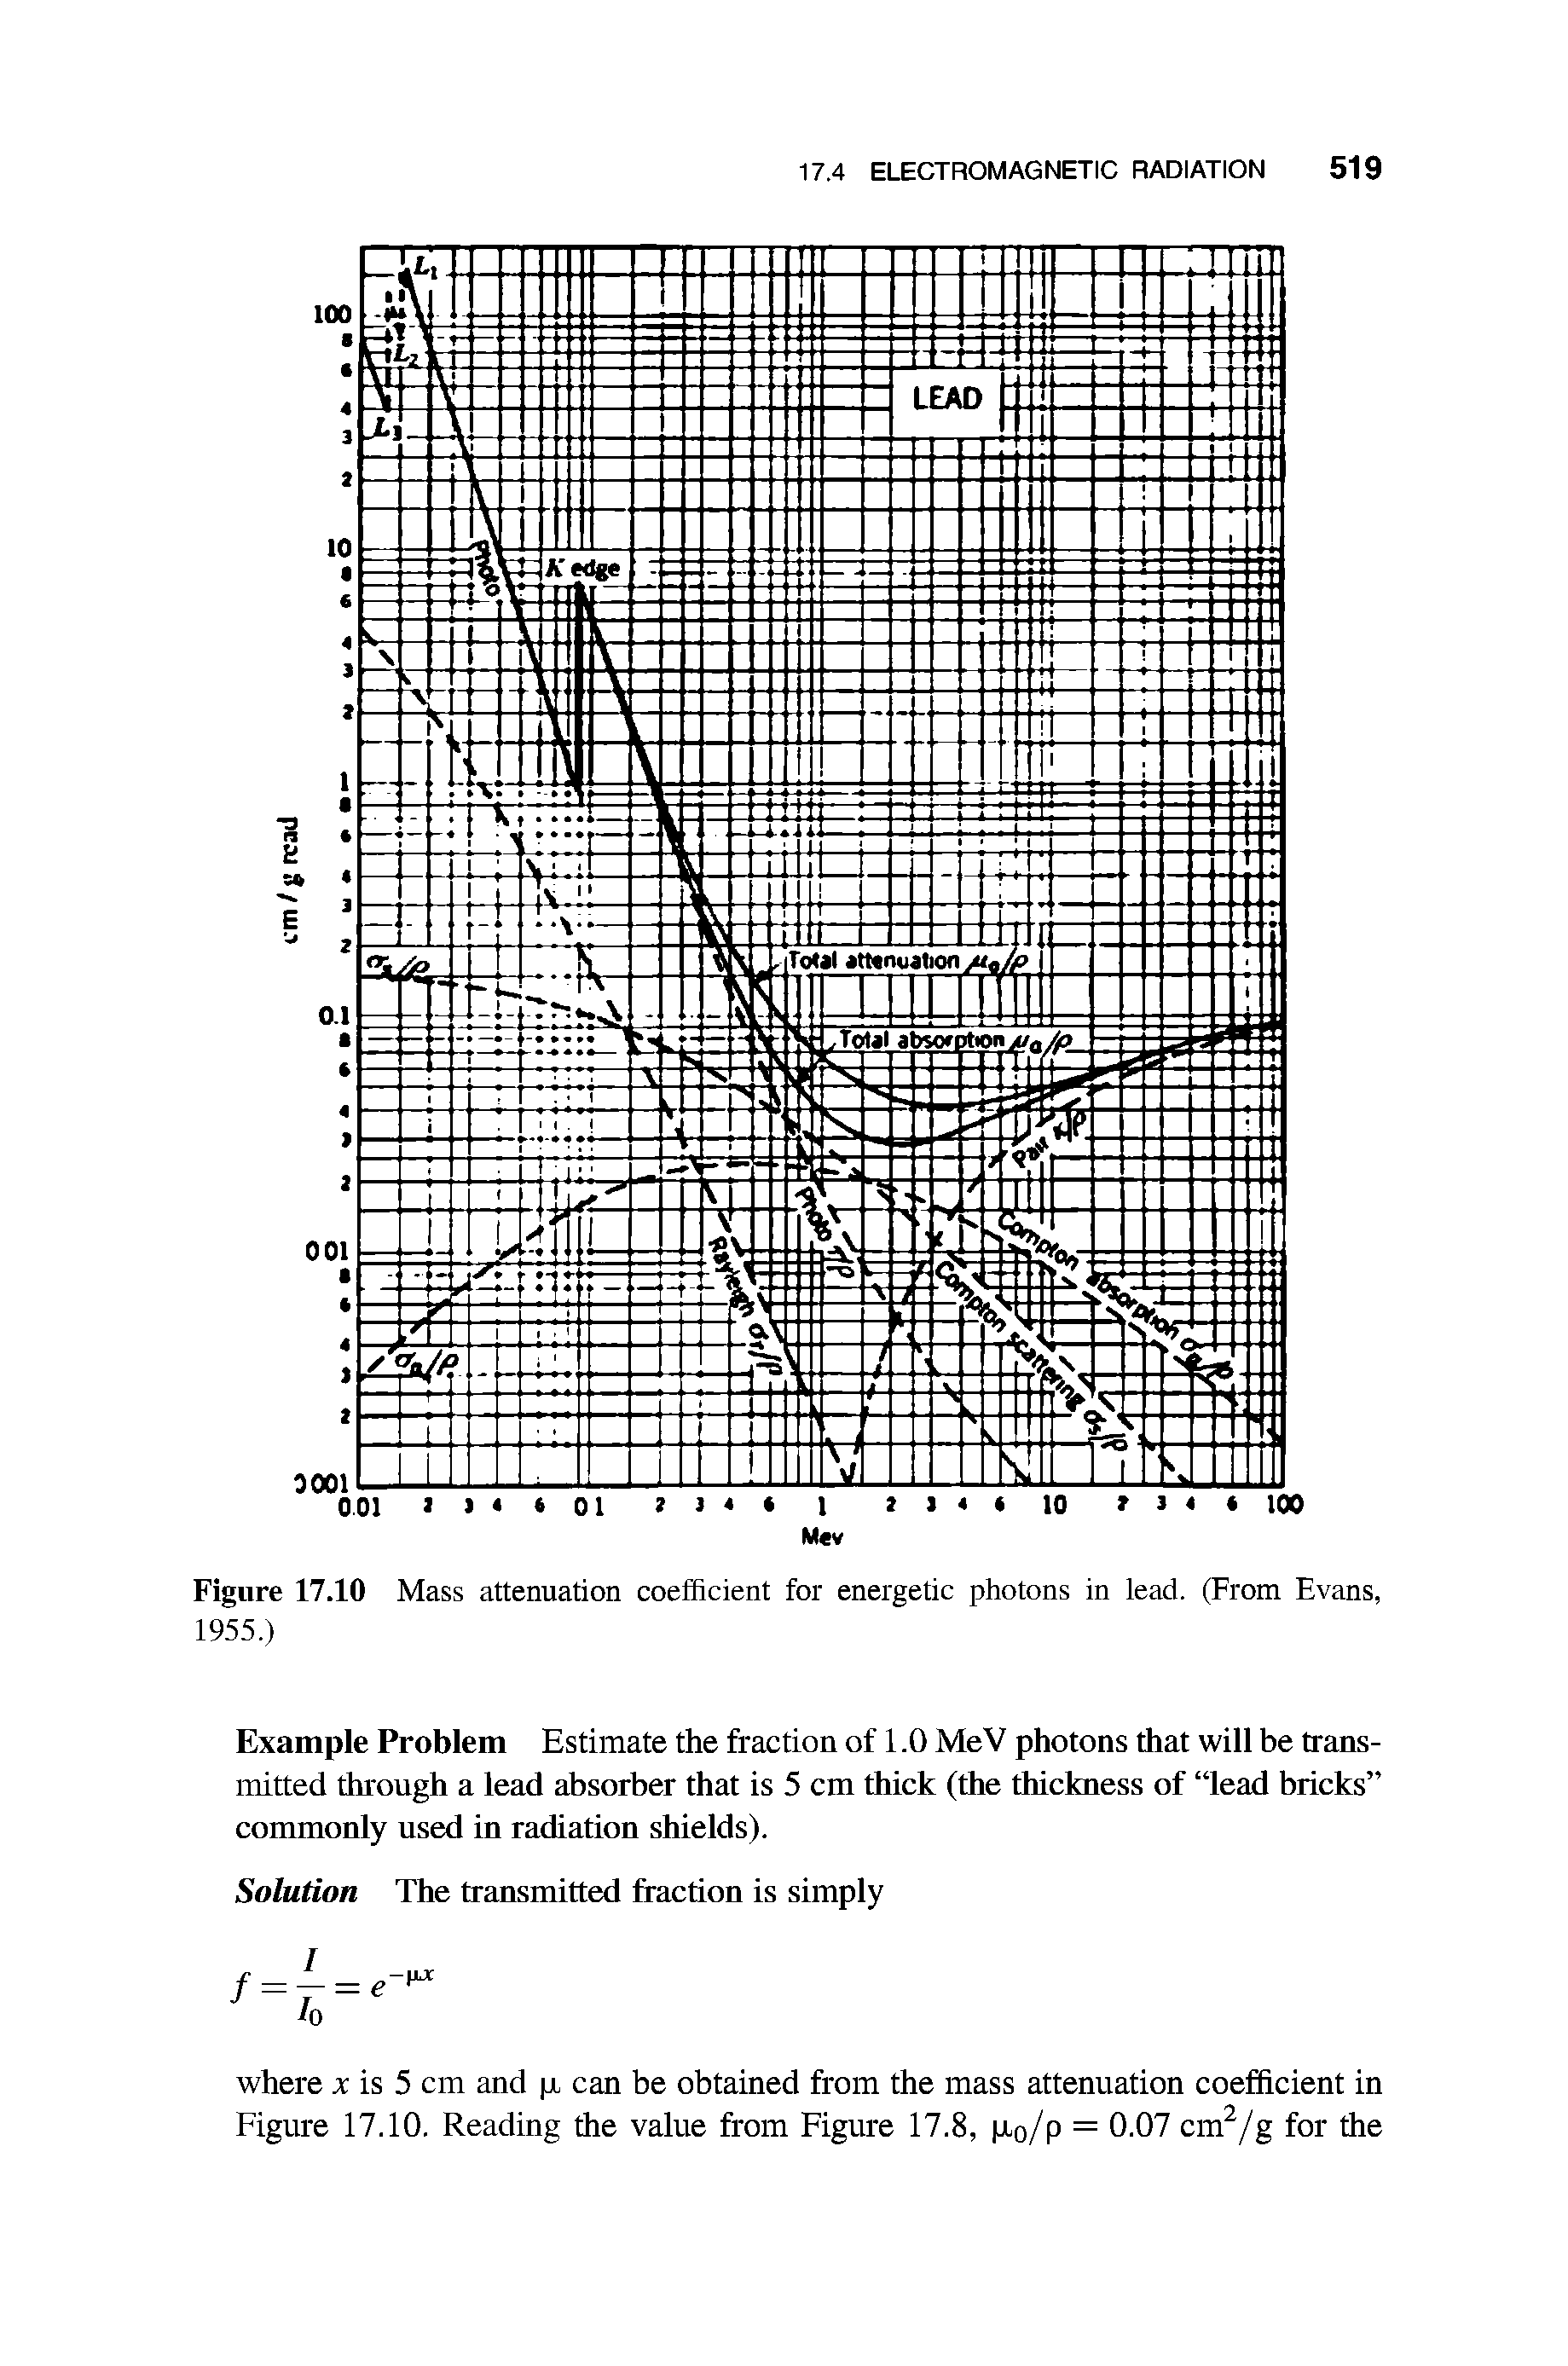 Figure 17.10 Mass attenuation coefficient for energetic photons in lead. (From Evans, 1955.)...